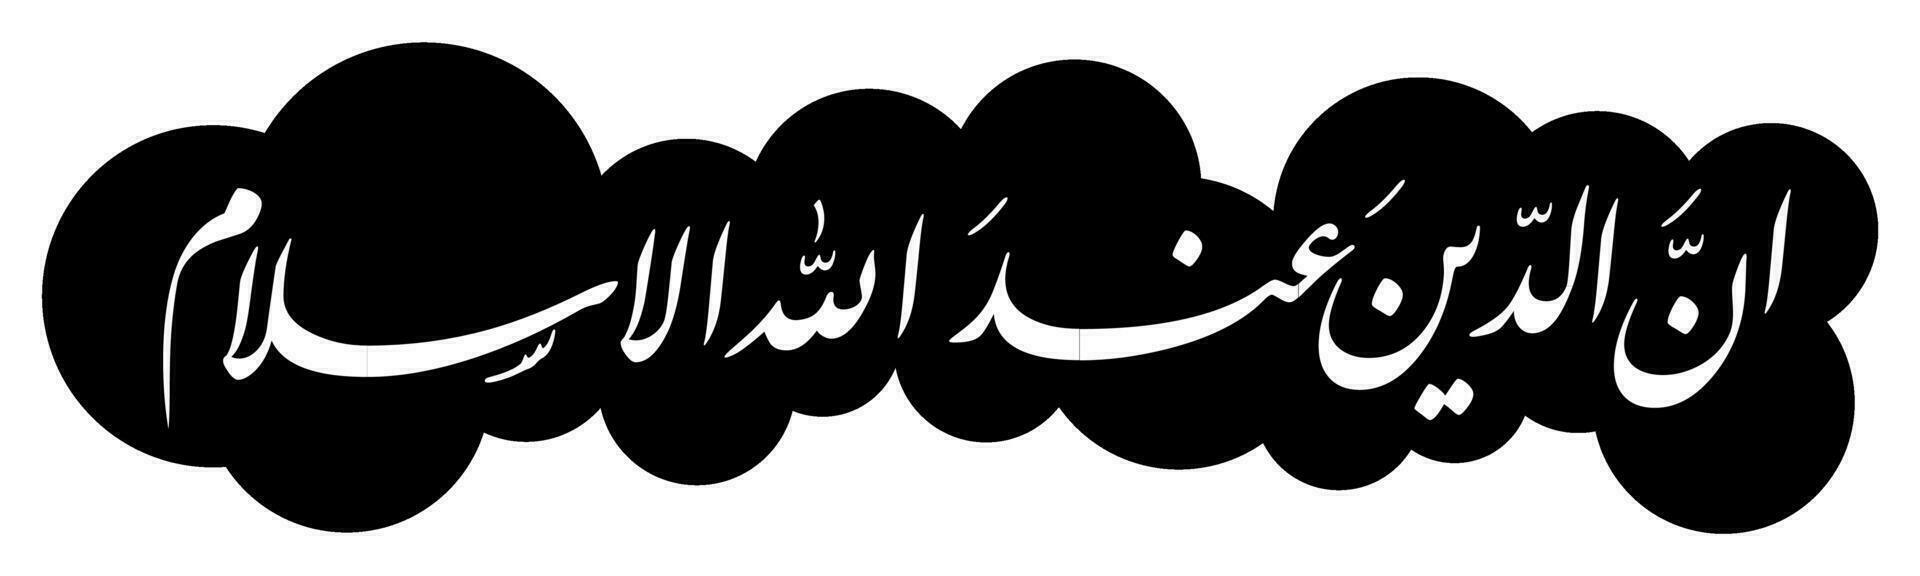 Al-Quran calligraphy, translation verily the religion before Allah is Islam vector